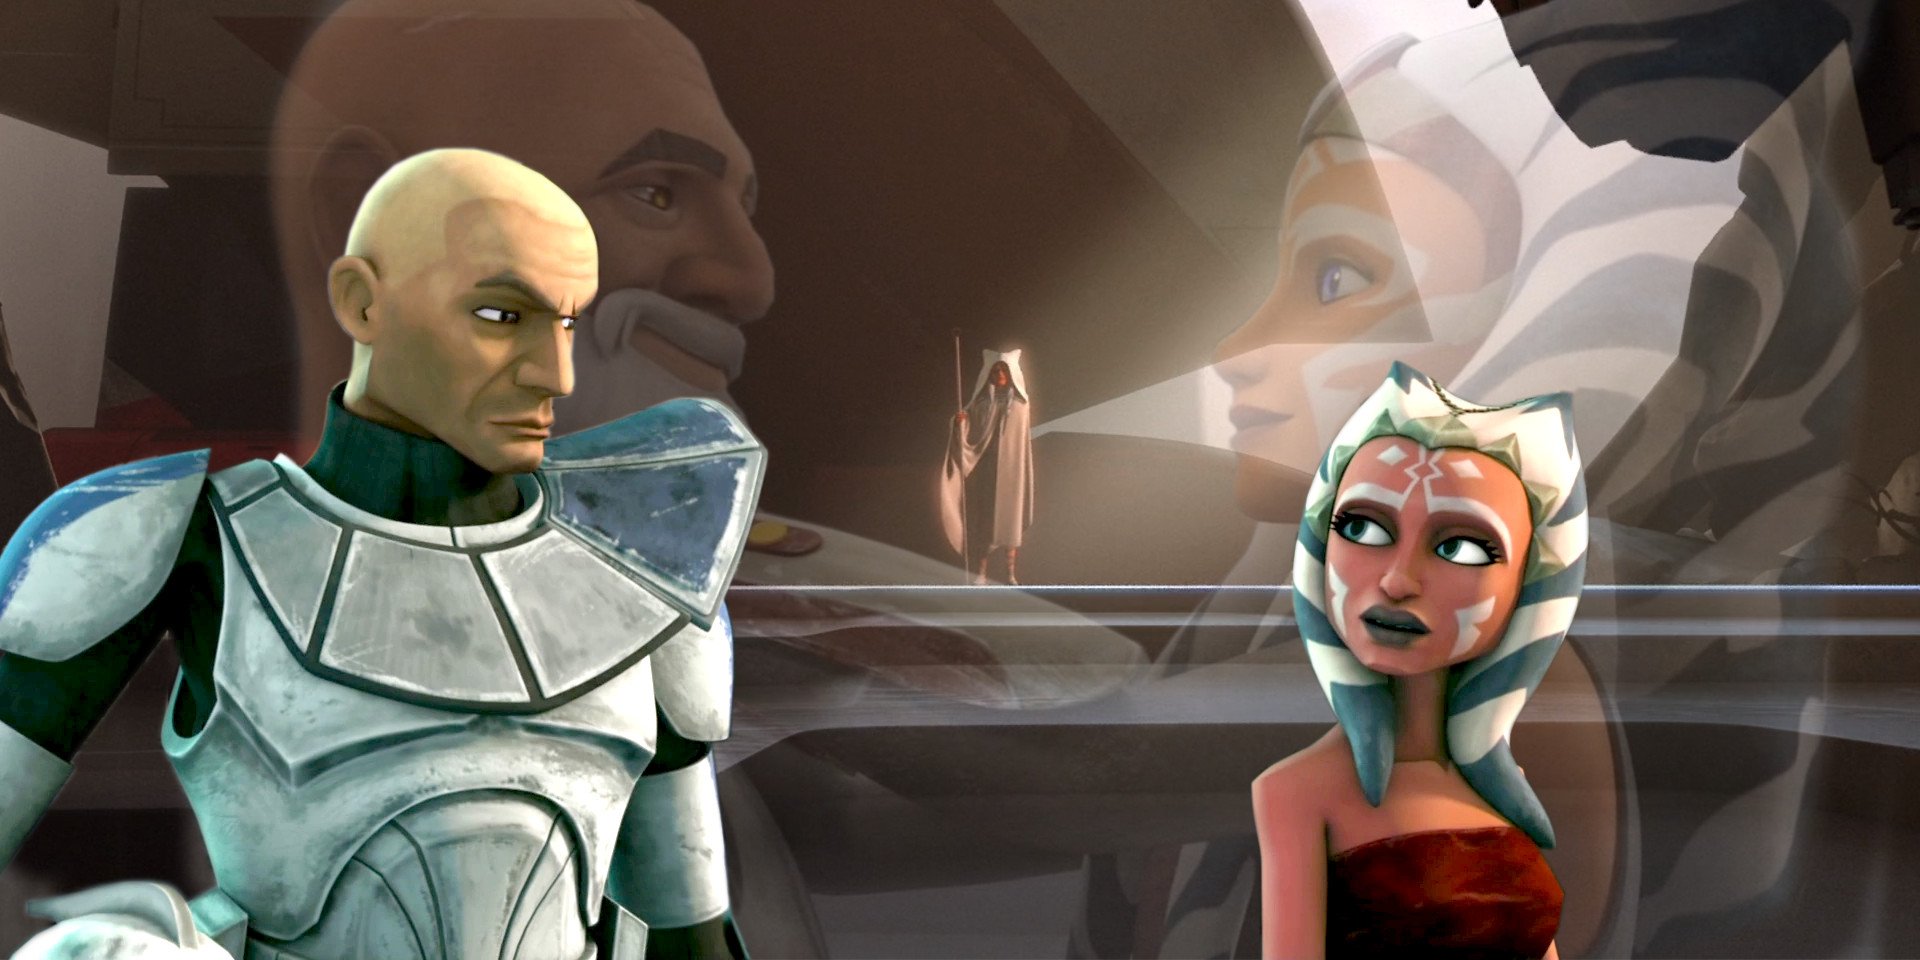 The Mandalorian’s Dave Filoni Teases Another ‘Star Wars: The Clone Wars’ Character For Season 2